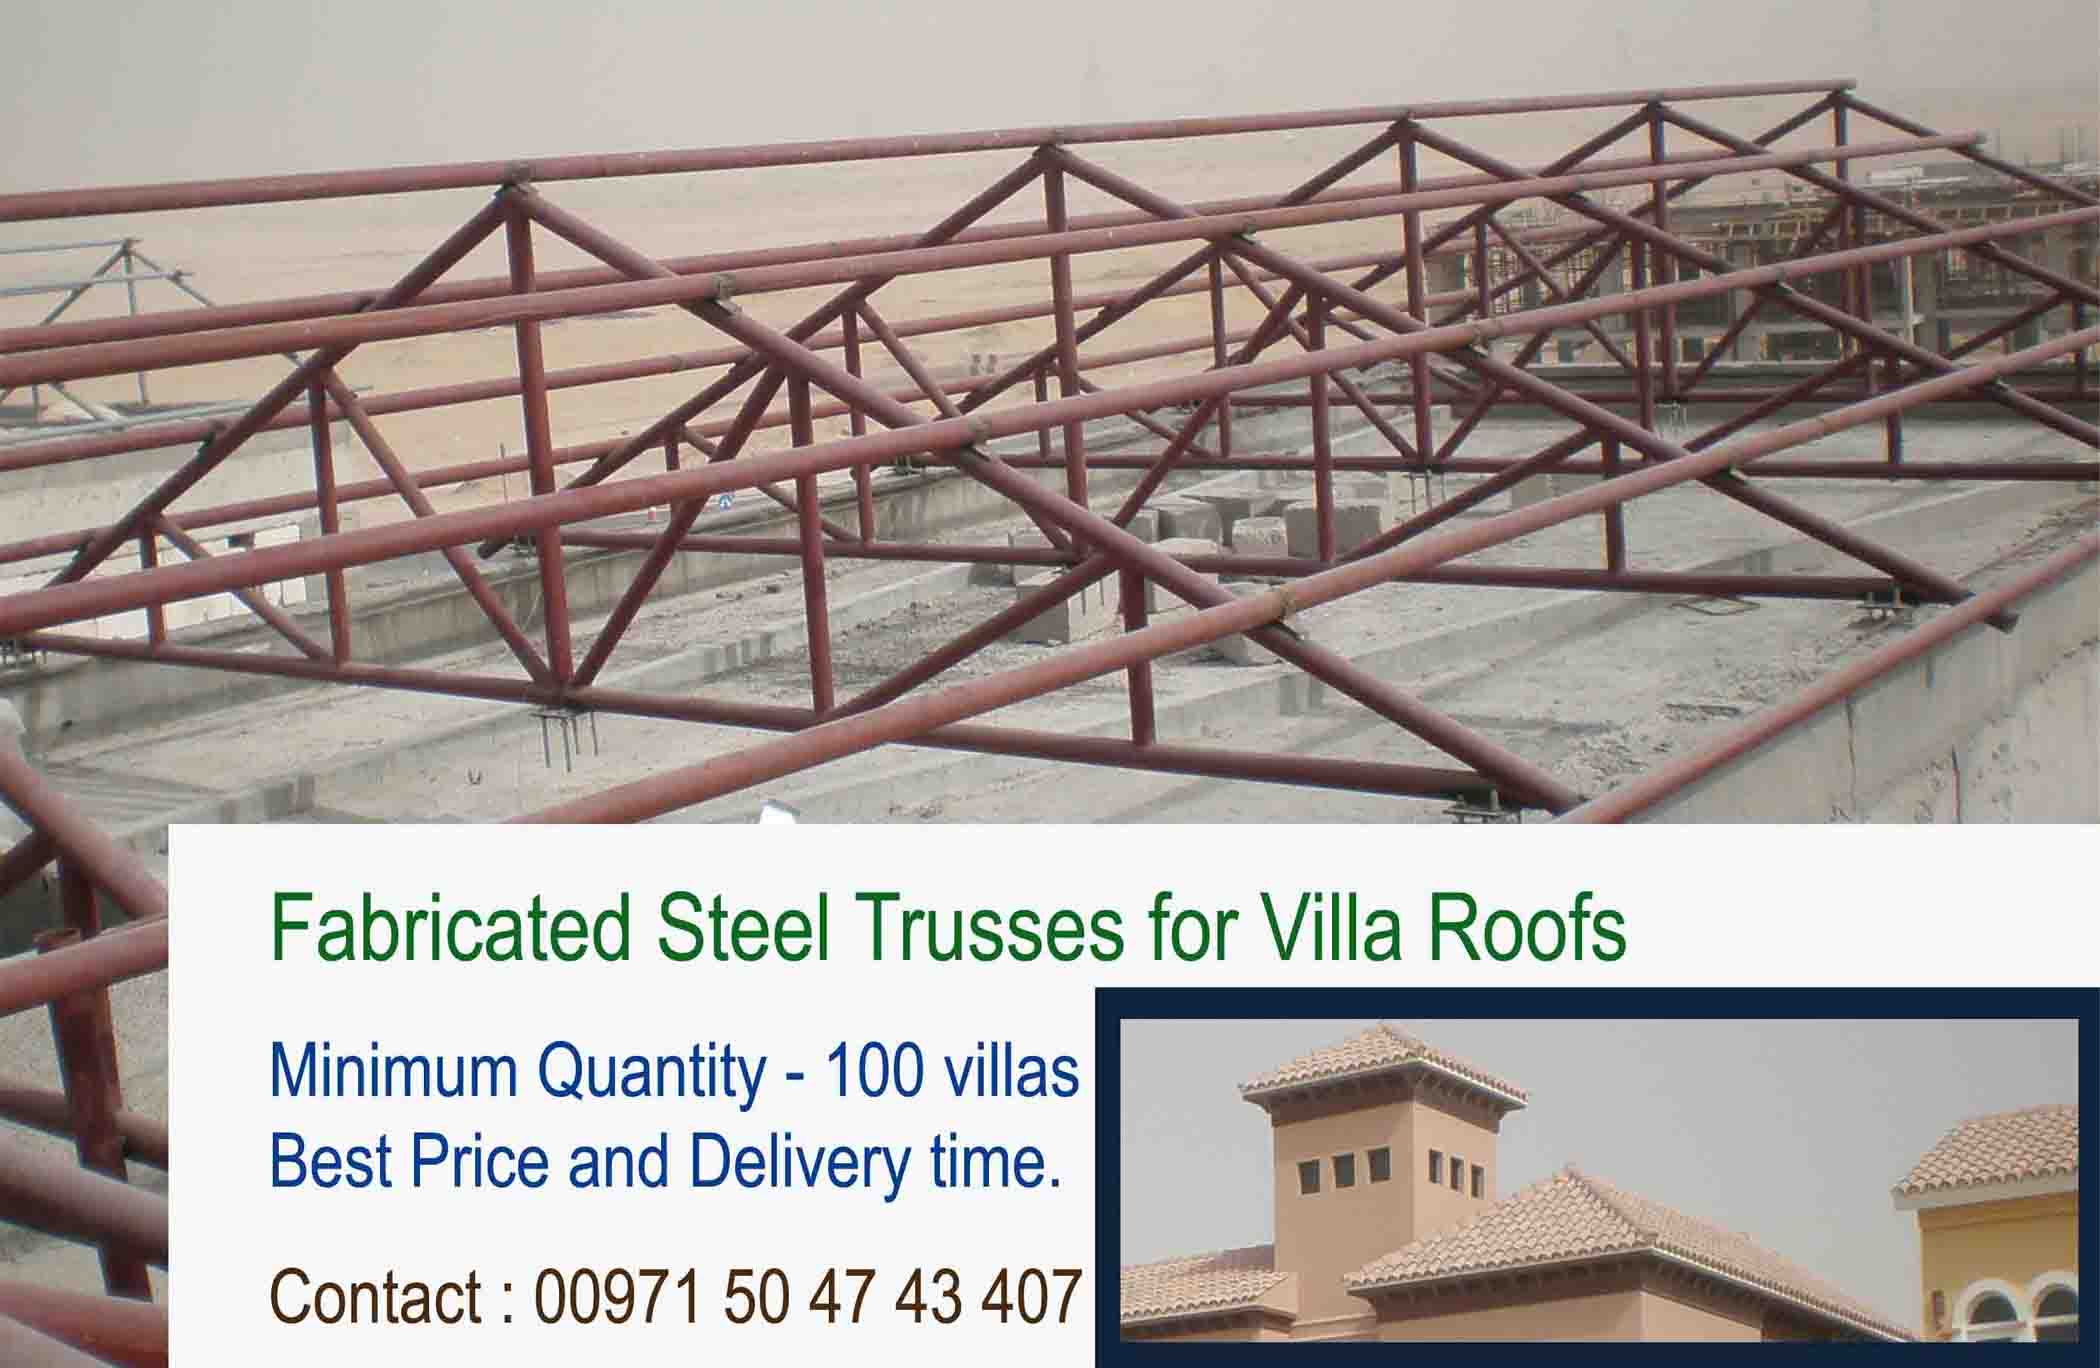 How+to+Build+Metal+Trusses Steel Trusses For Villa Roofs At Dubai 